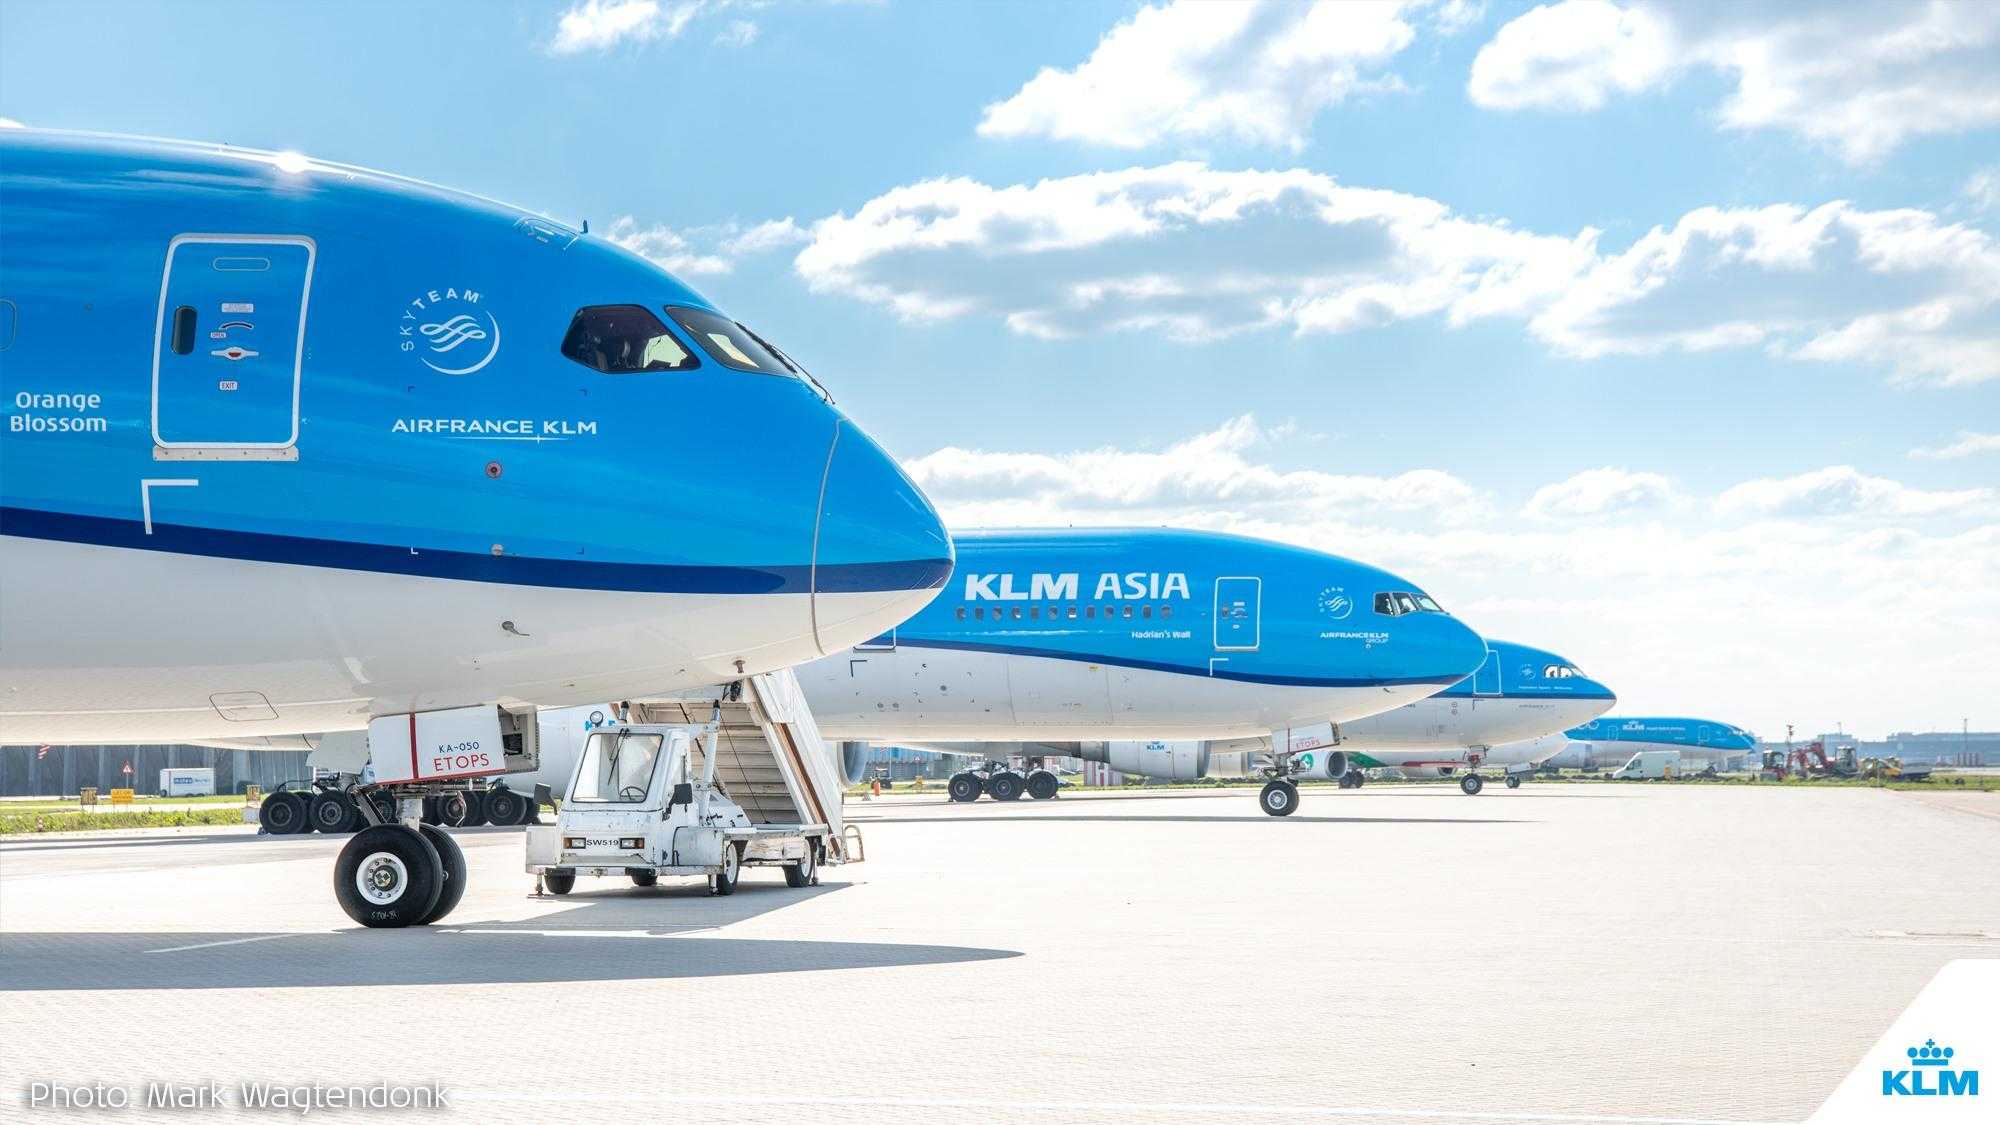 Search & book flightswith klm